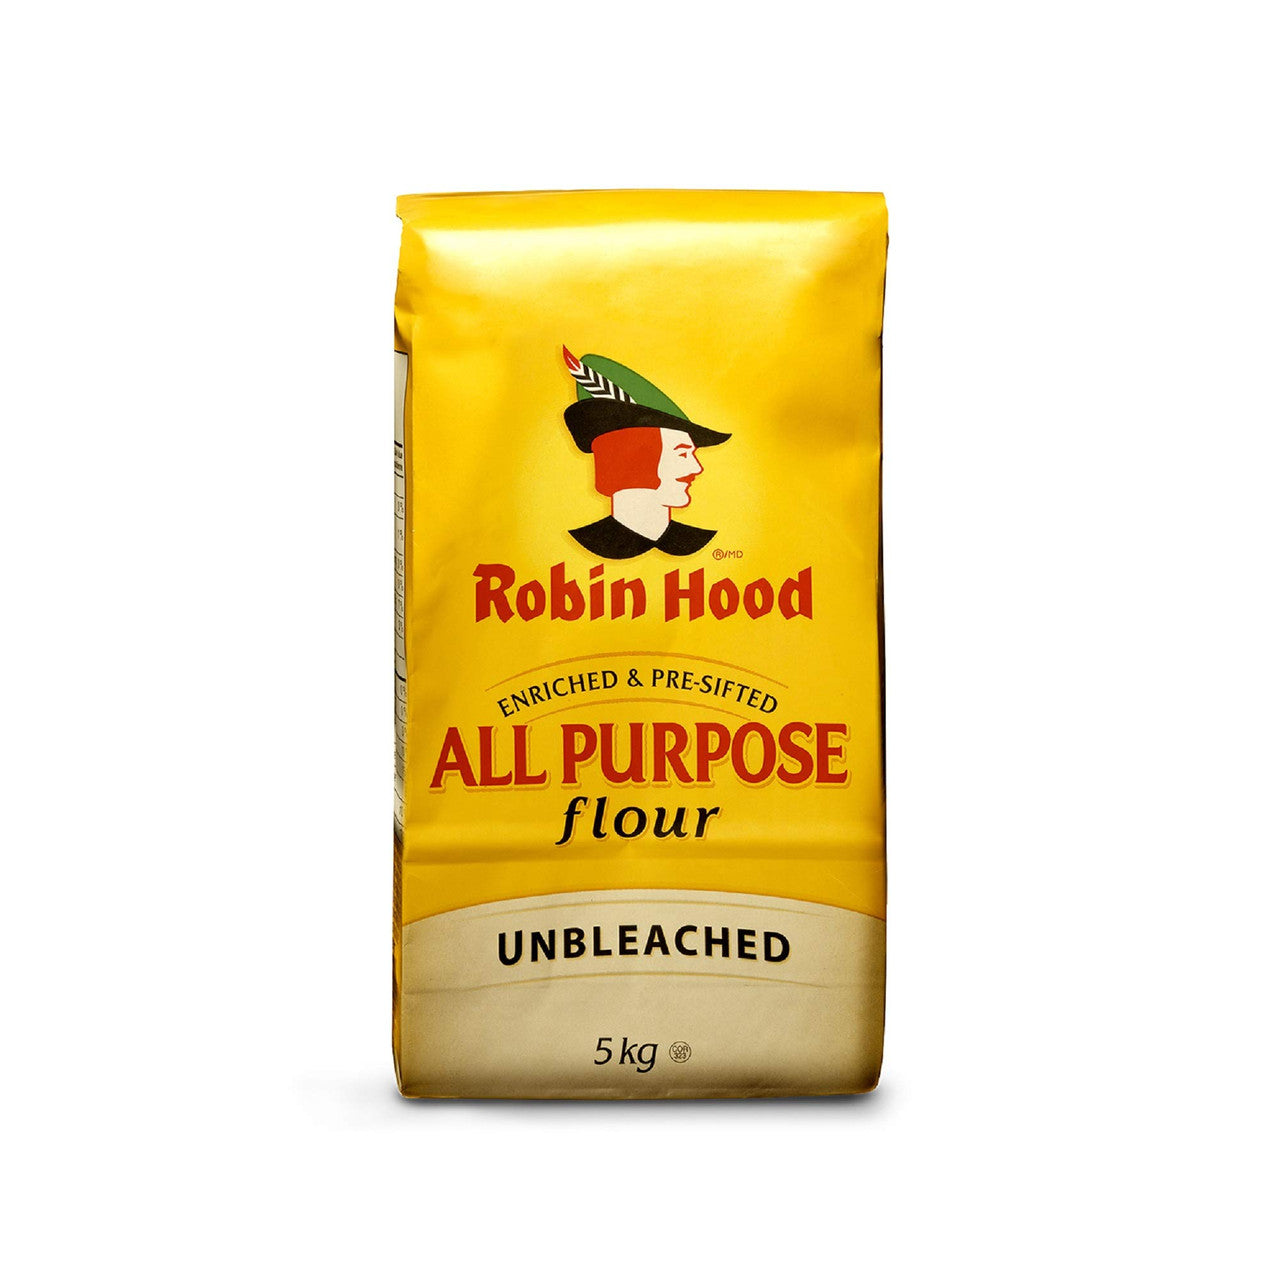 Robin Hood All Purpose Unbleached Flour 5kg bag  {Imported from Canada}